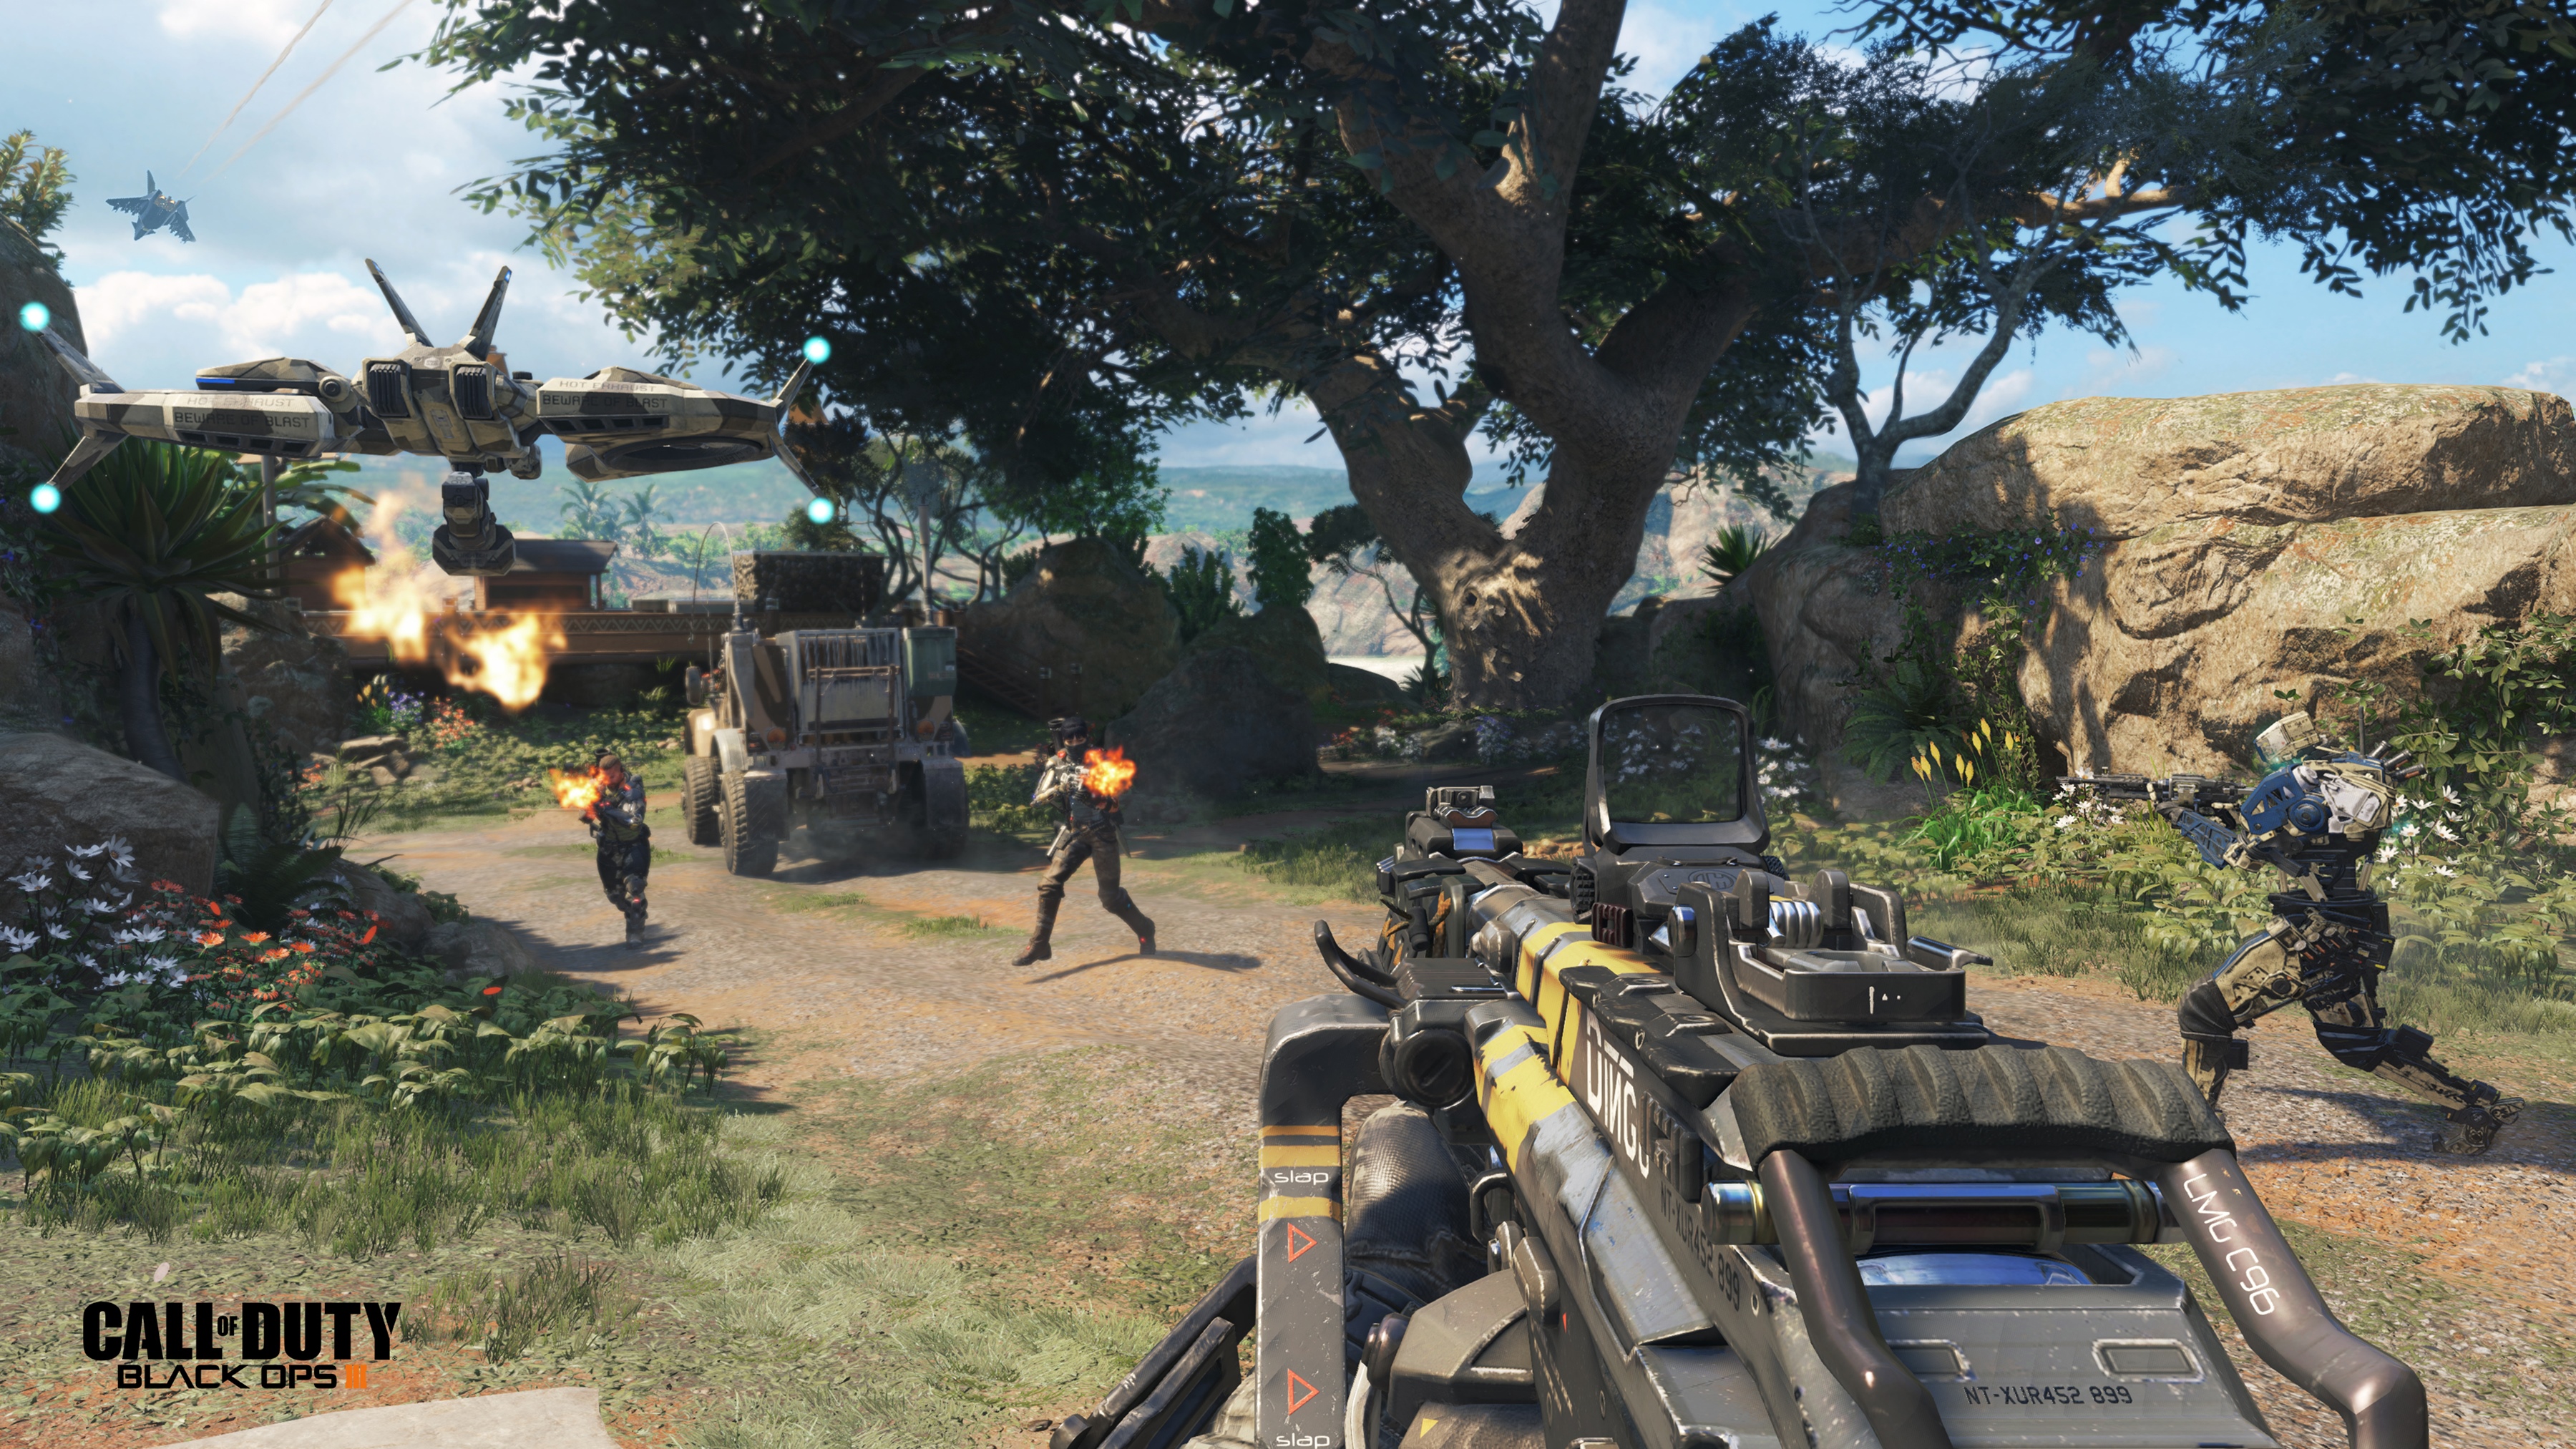 Call Of Duty Black Ops Graphics Settings For Beta Build On Pc Allow